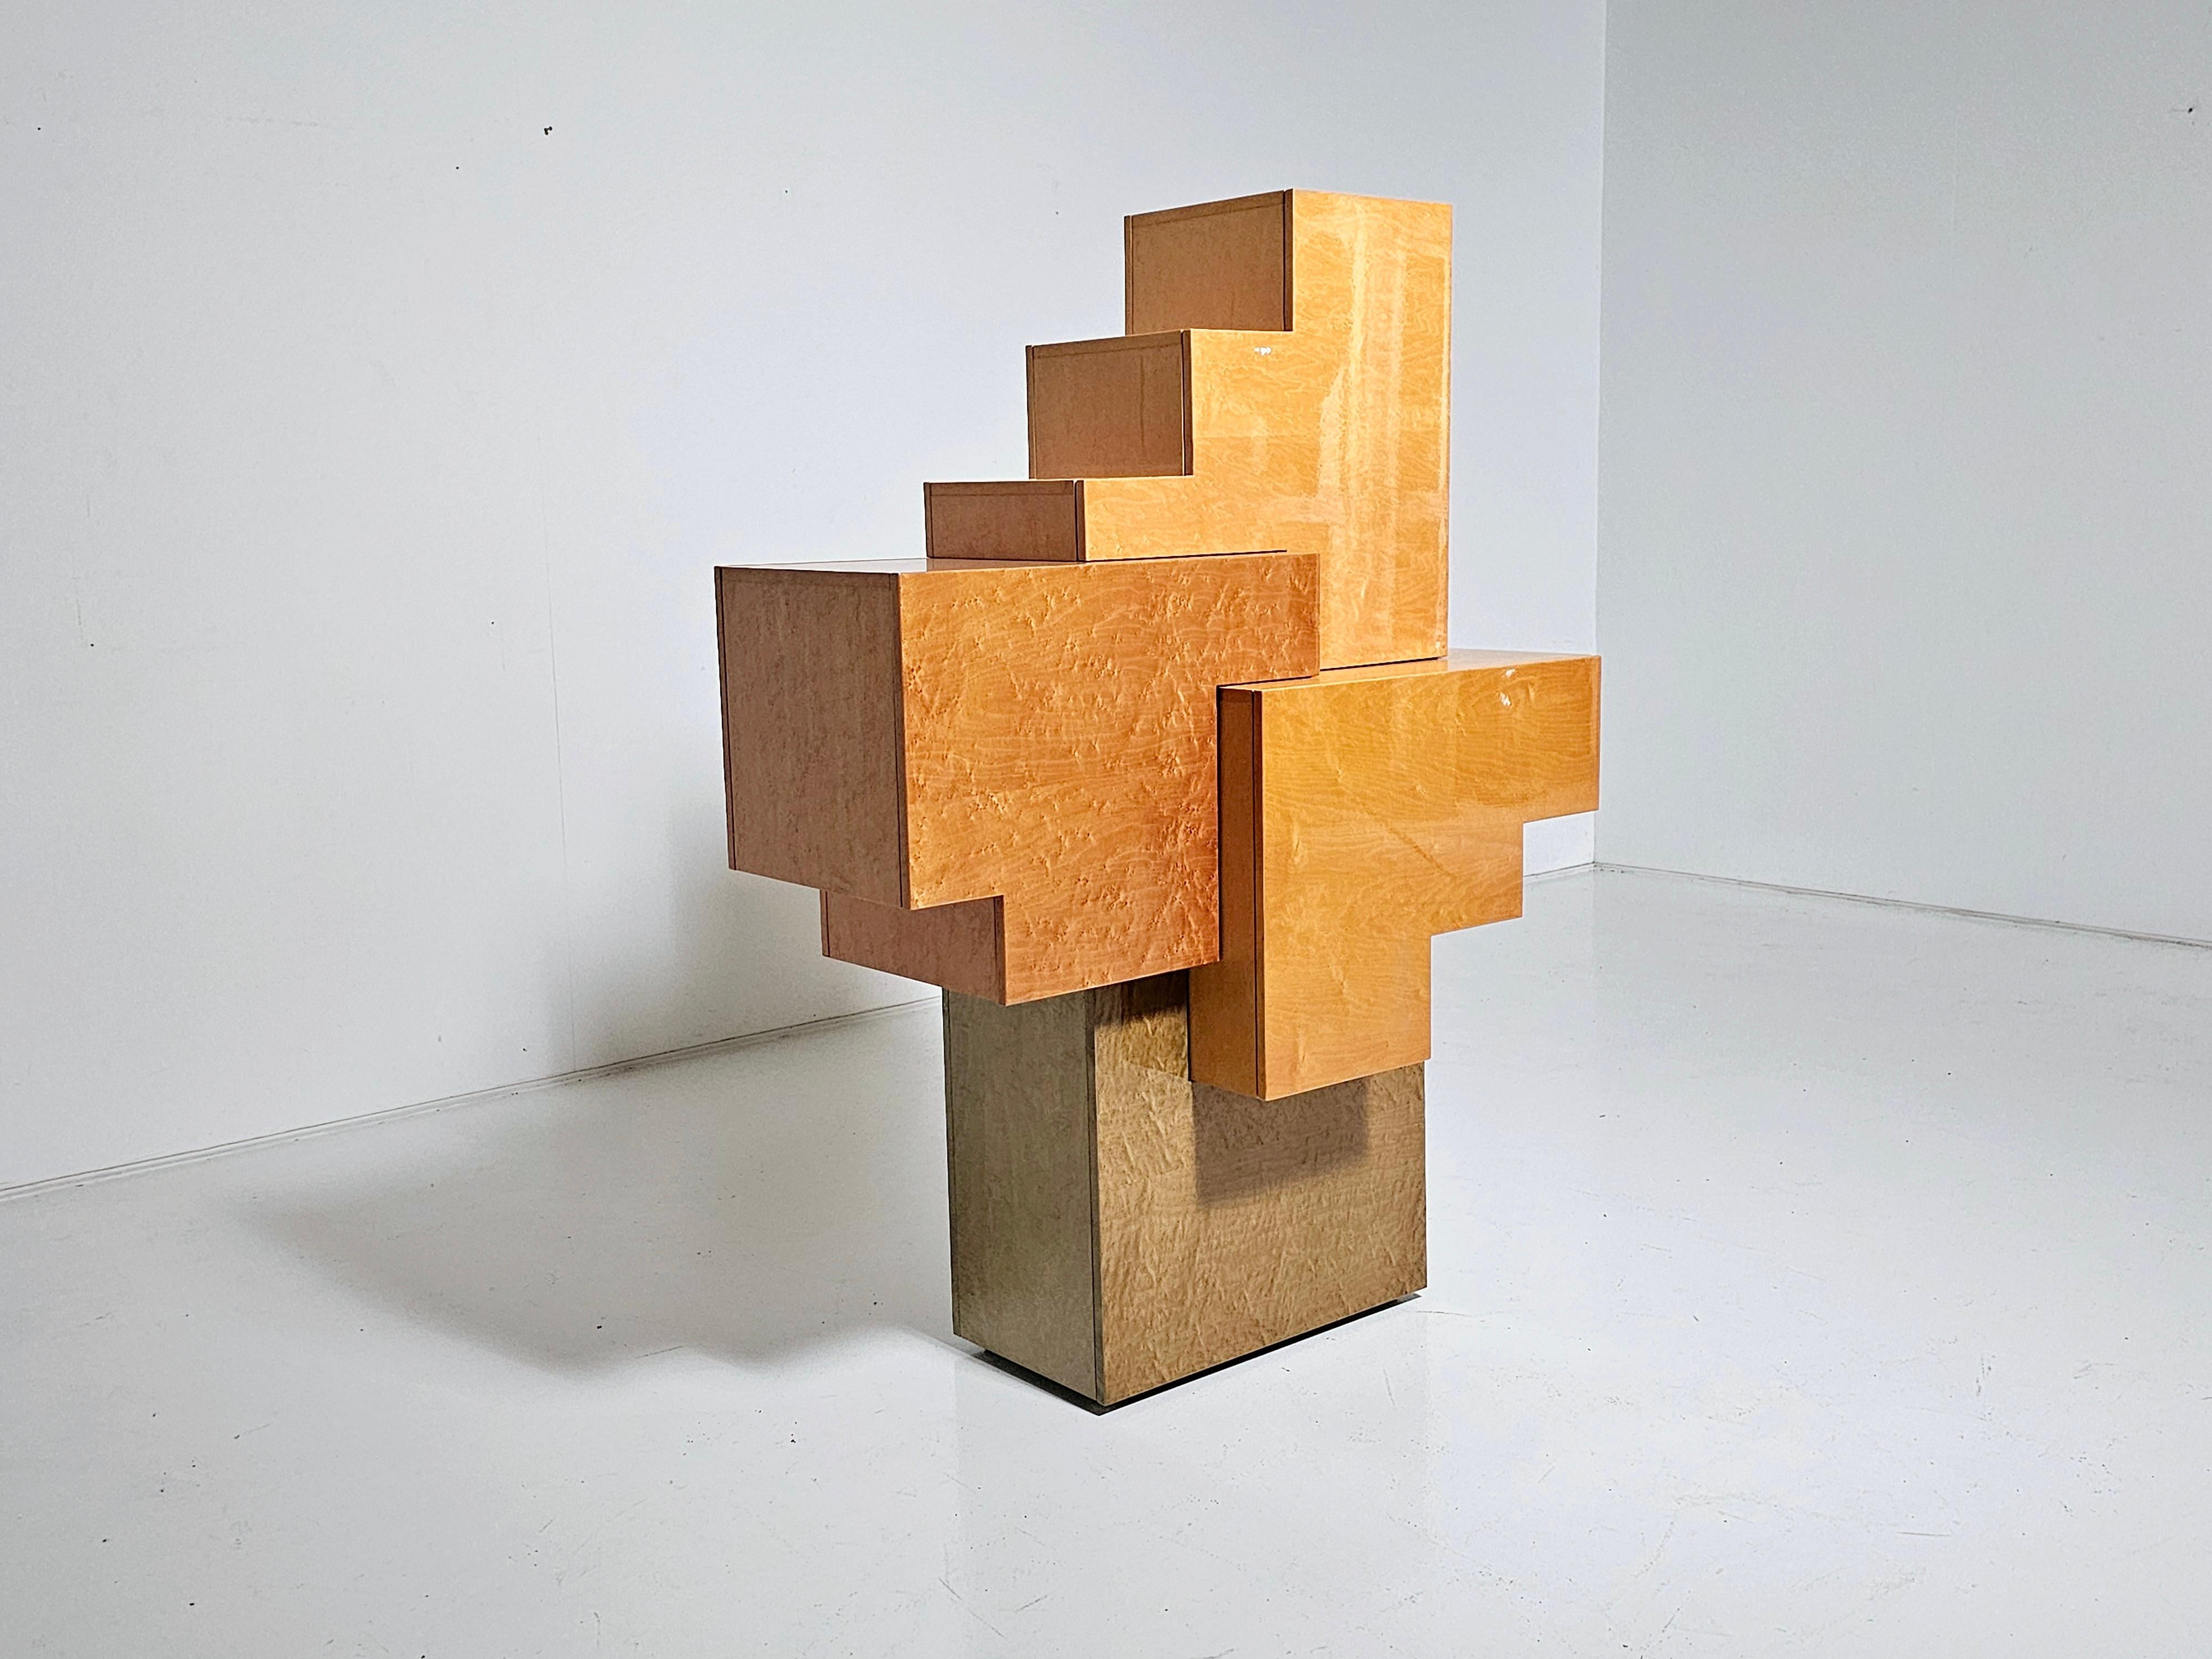 Unique sculptural cubist cabinet made in Italy in the 1990s. Made from Burlwood in different tones and colors. Very high-quality piece. Most likely one of a kind. It can be used freestanding.

The combination of yellow, orange, and green colors